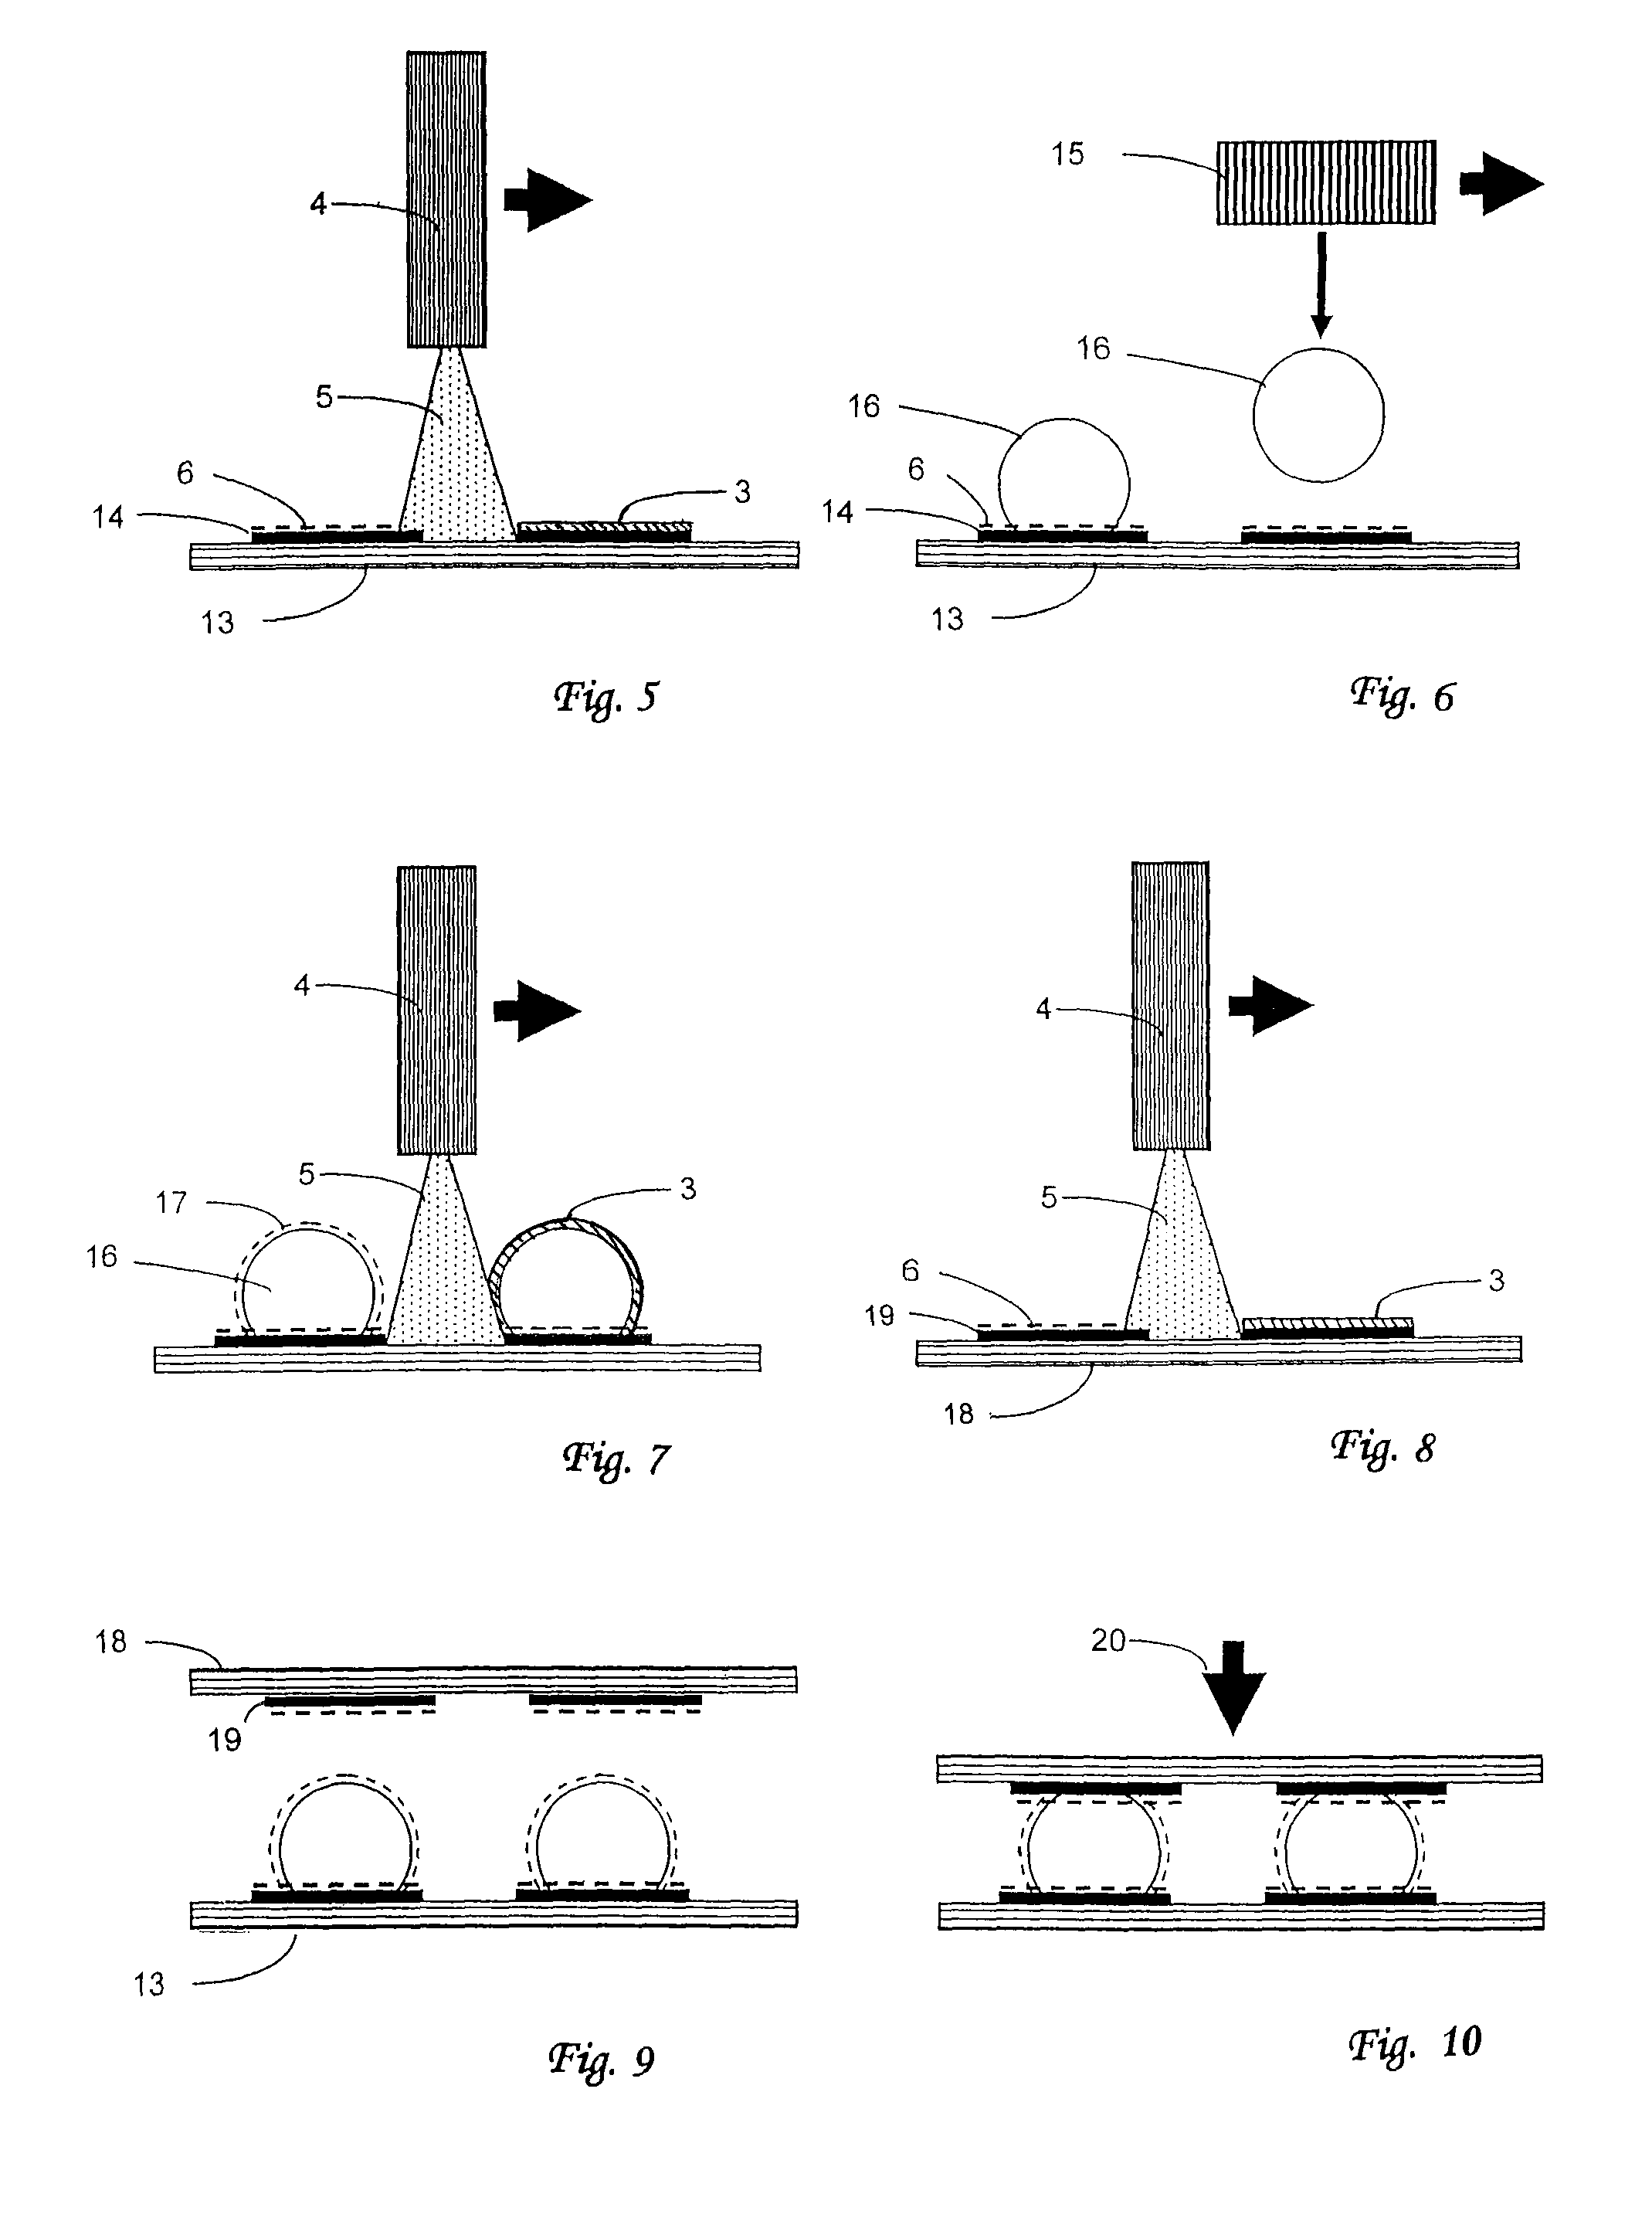 Method of plasma preparation of metallic contacts to enhance mechanical and electrical integrity of subsequent interconnect bonds